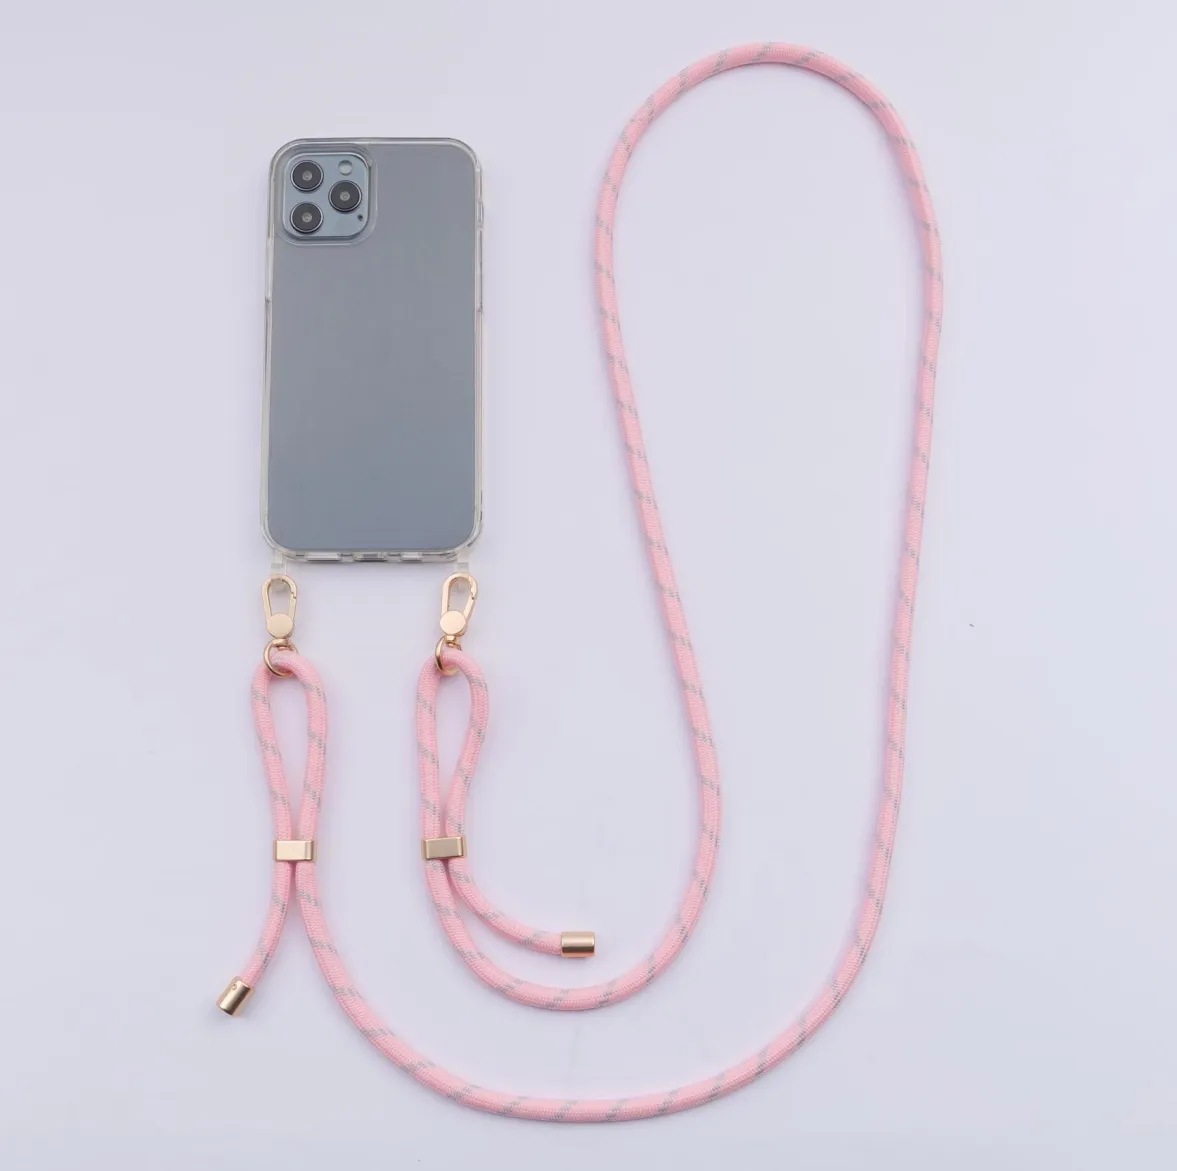 Adjustable Phone Lanyard Strap Mobile Hanging Rope Cords Cell Phone Accessories